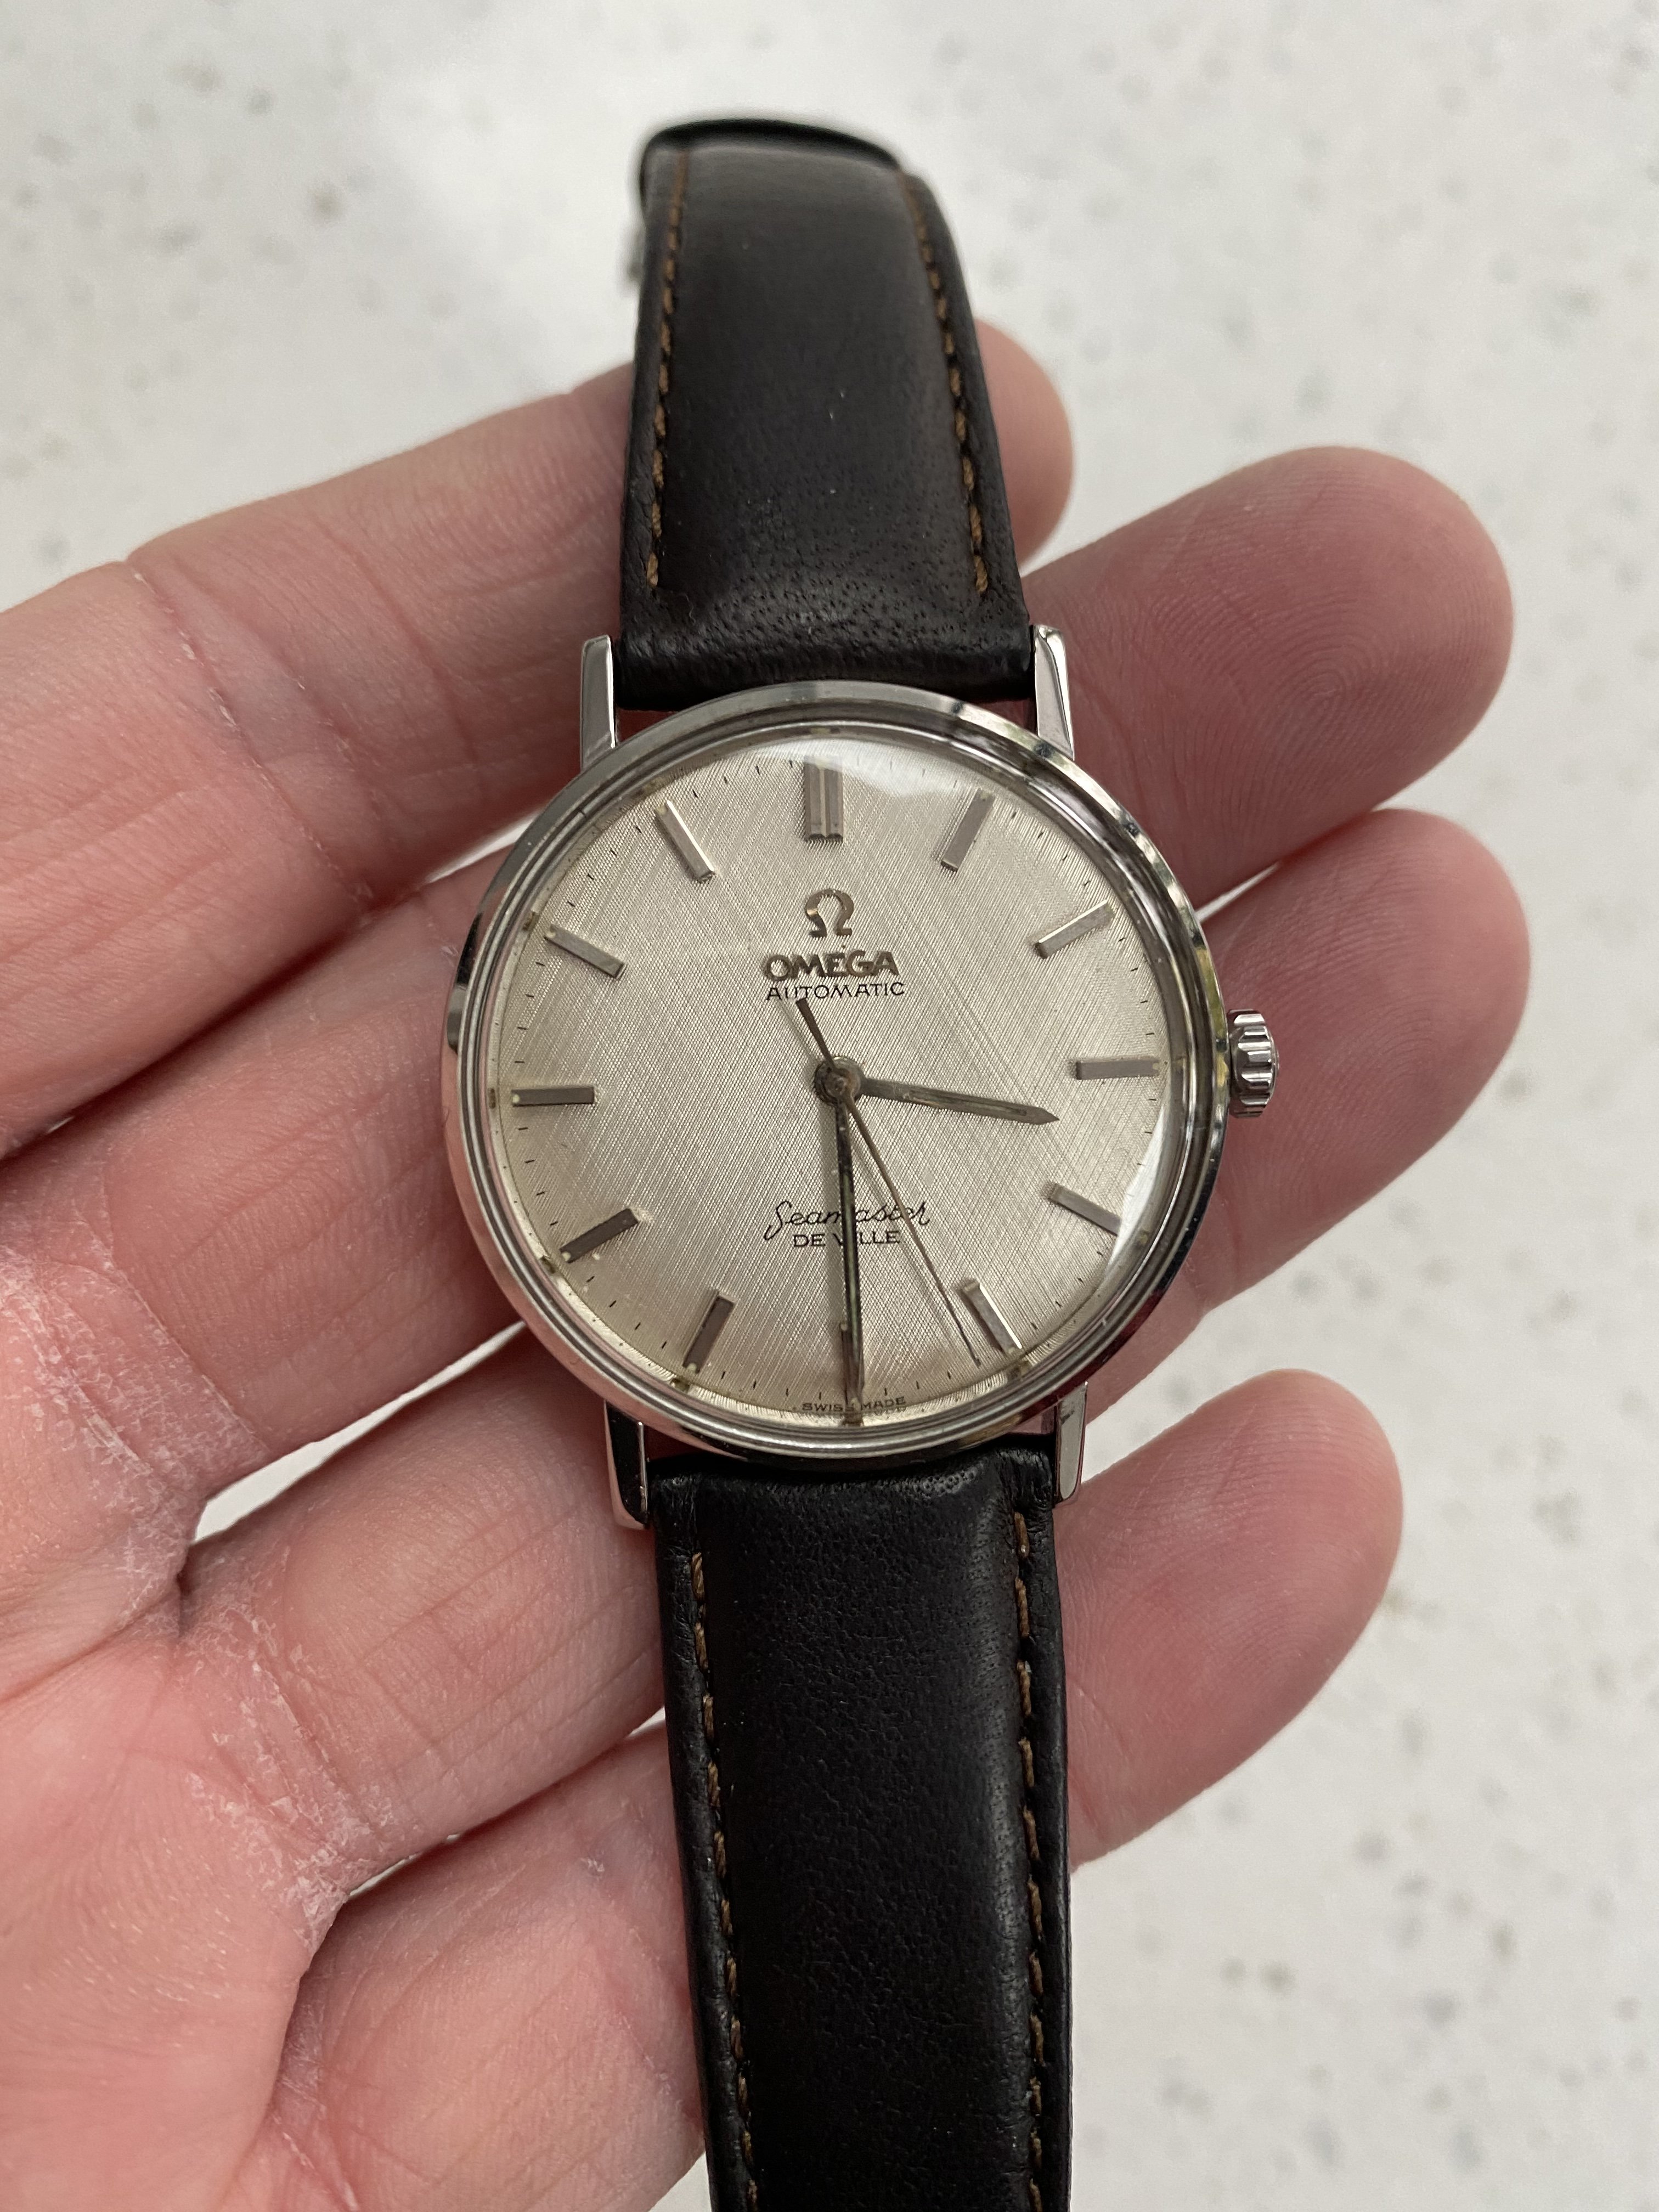 How to use PolyWatch - Vintage Omega Watches